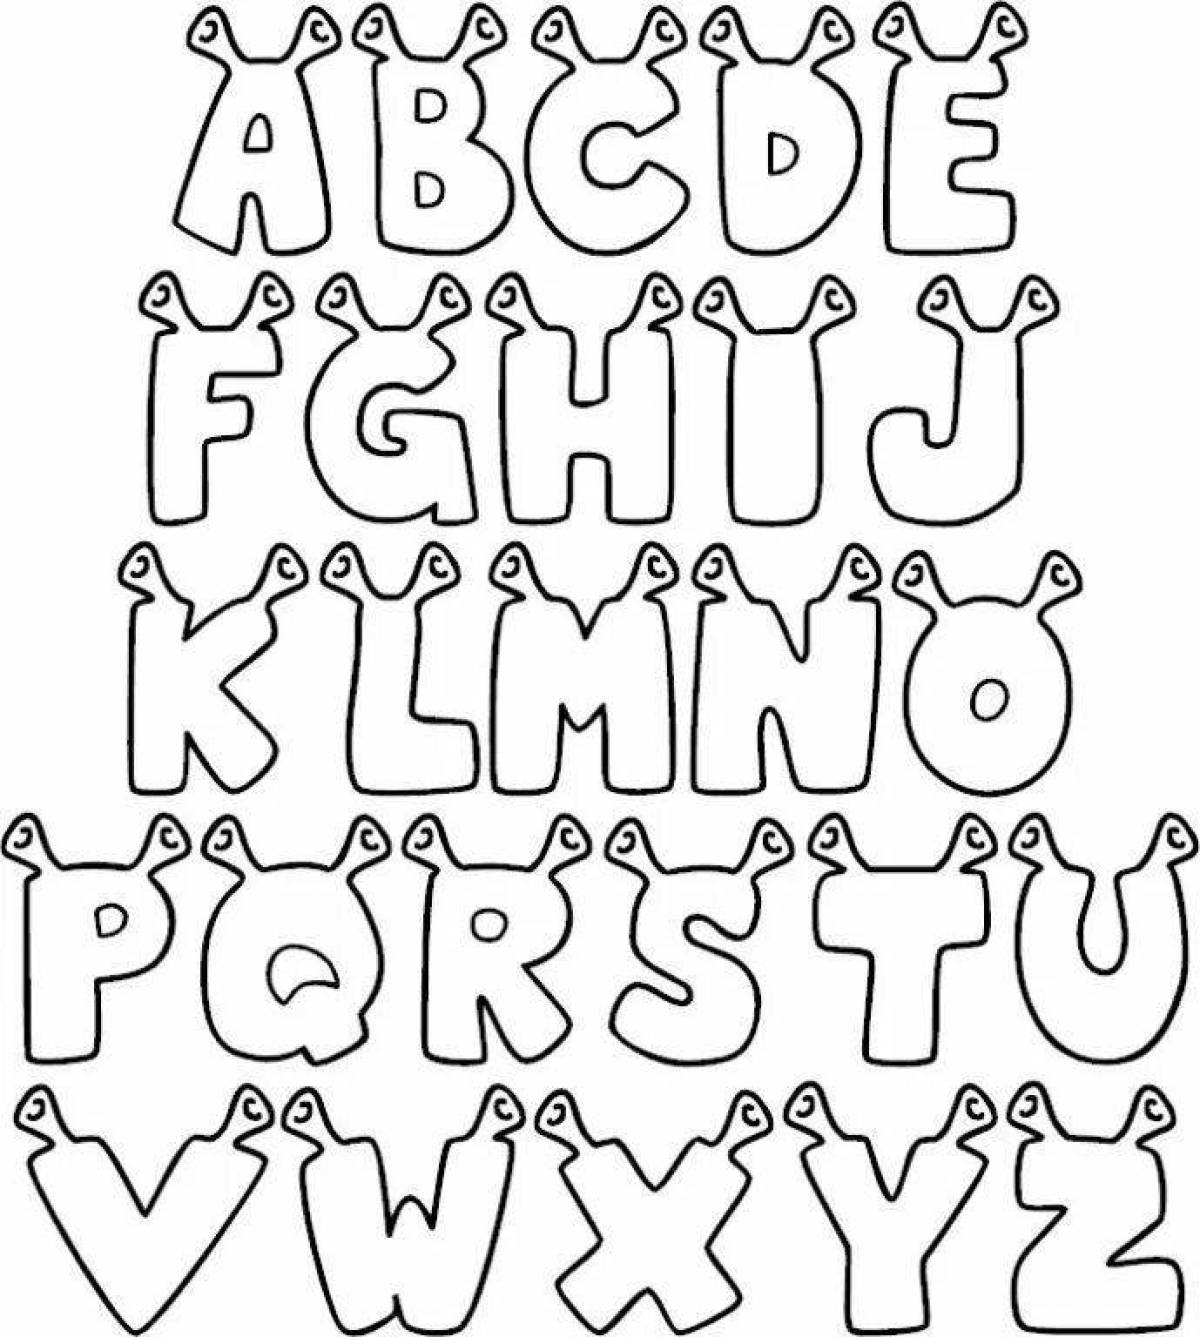 Violent coloring english alphabet with eyes